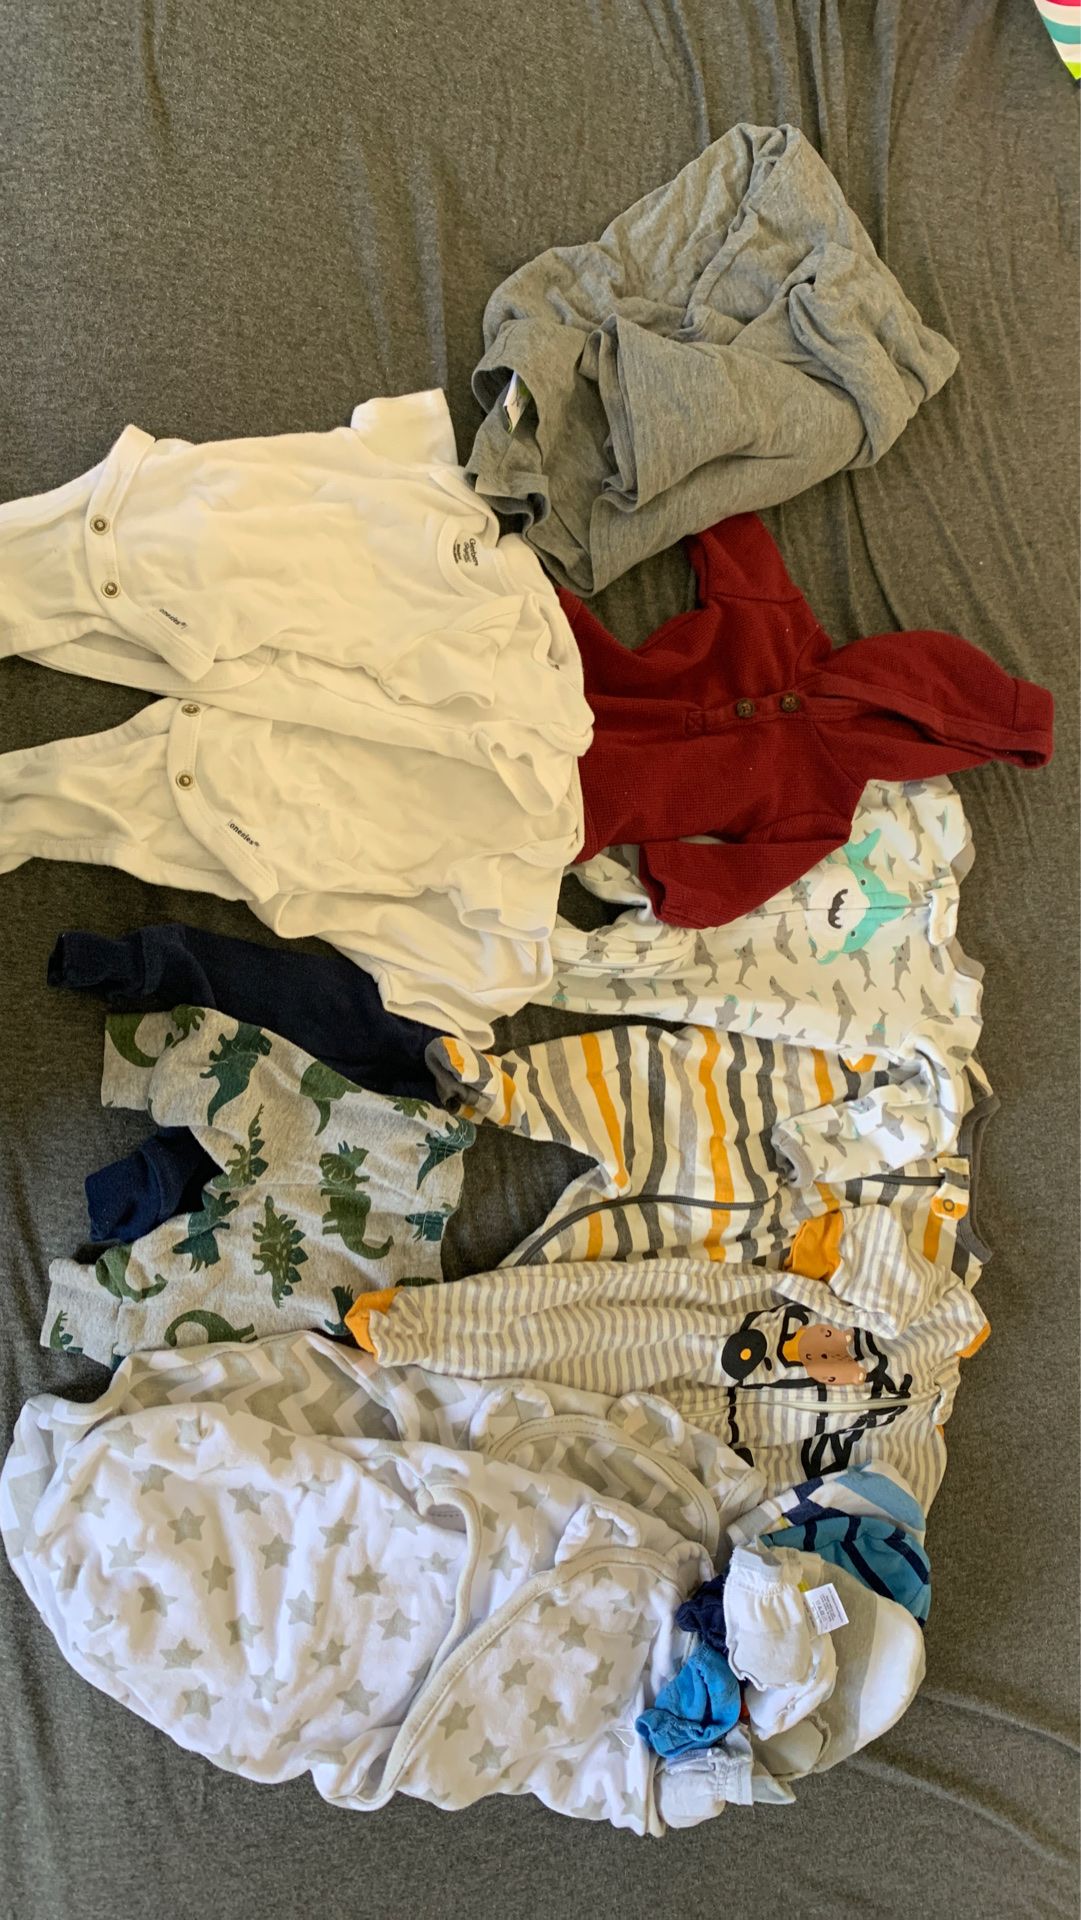 Newborn baby clothes for sale